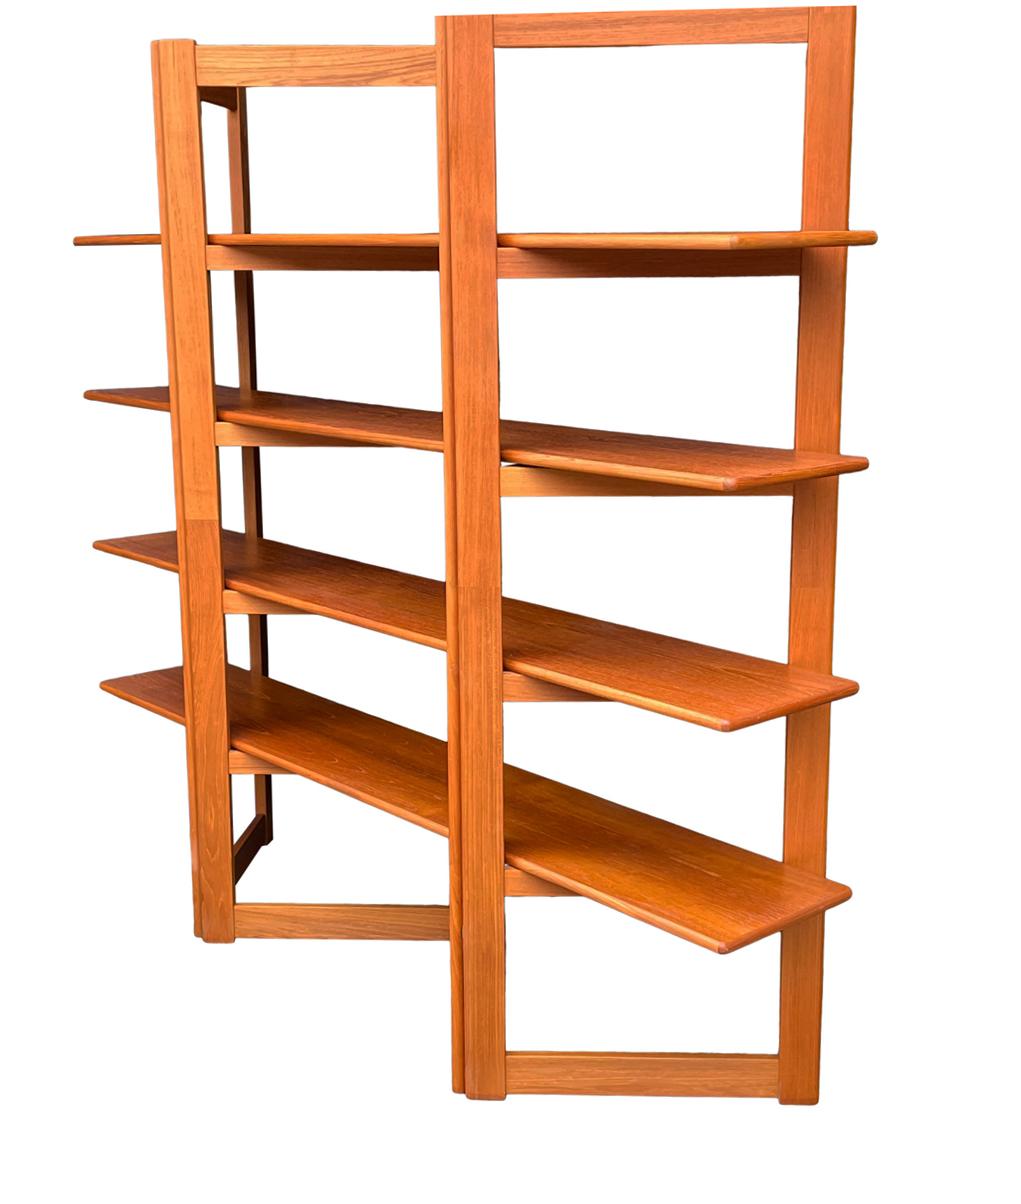 Midcentury Danish Modern Teak Shelving Unit, Etagere, or Wall Unit In Good Condition For Sale In Philadelphia, PA